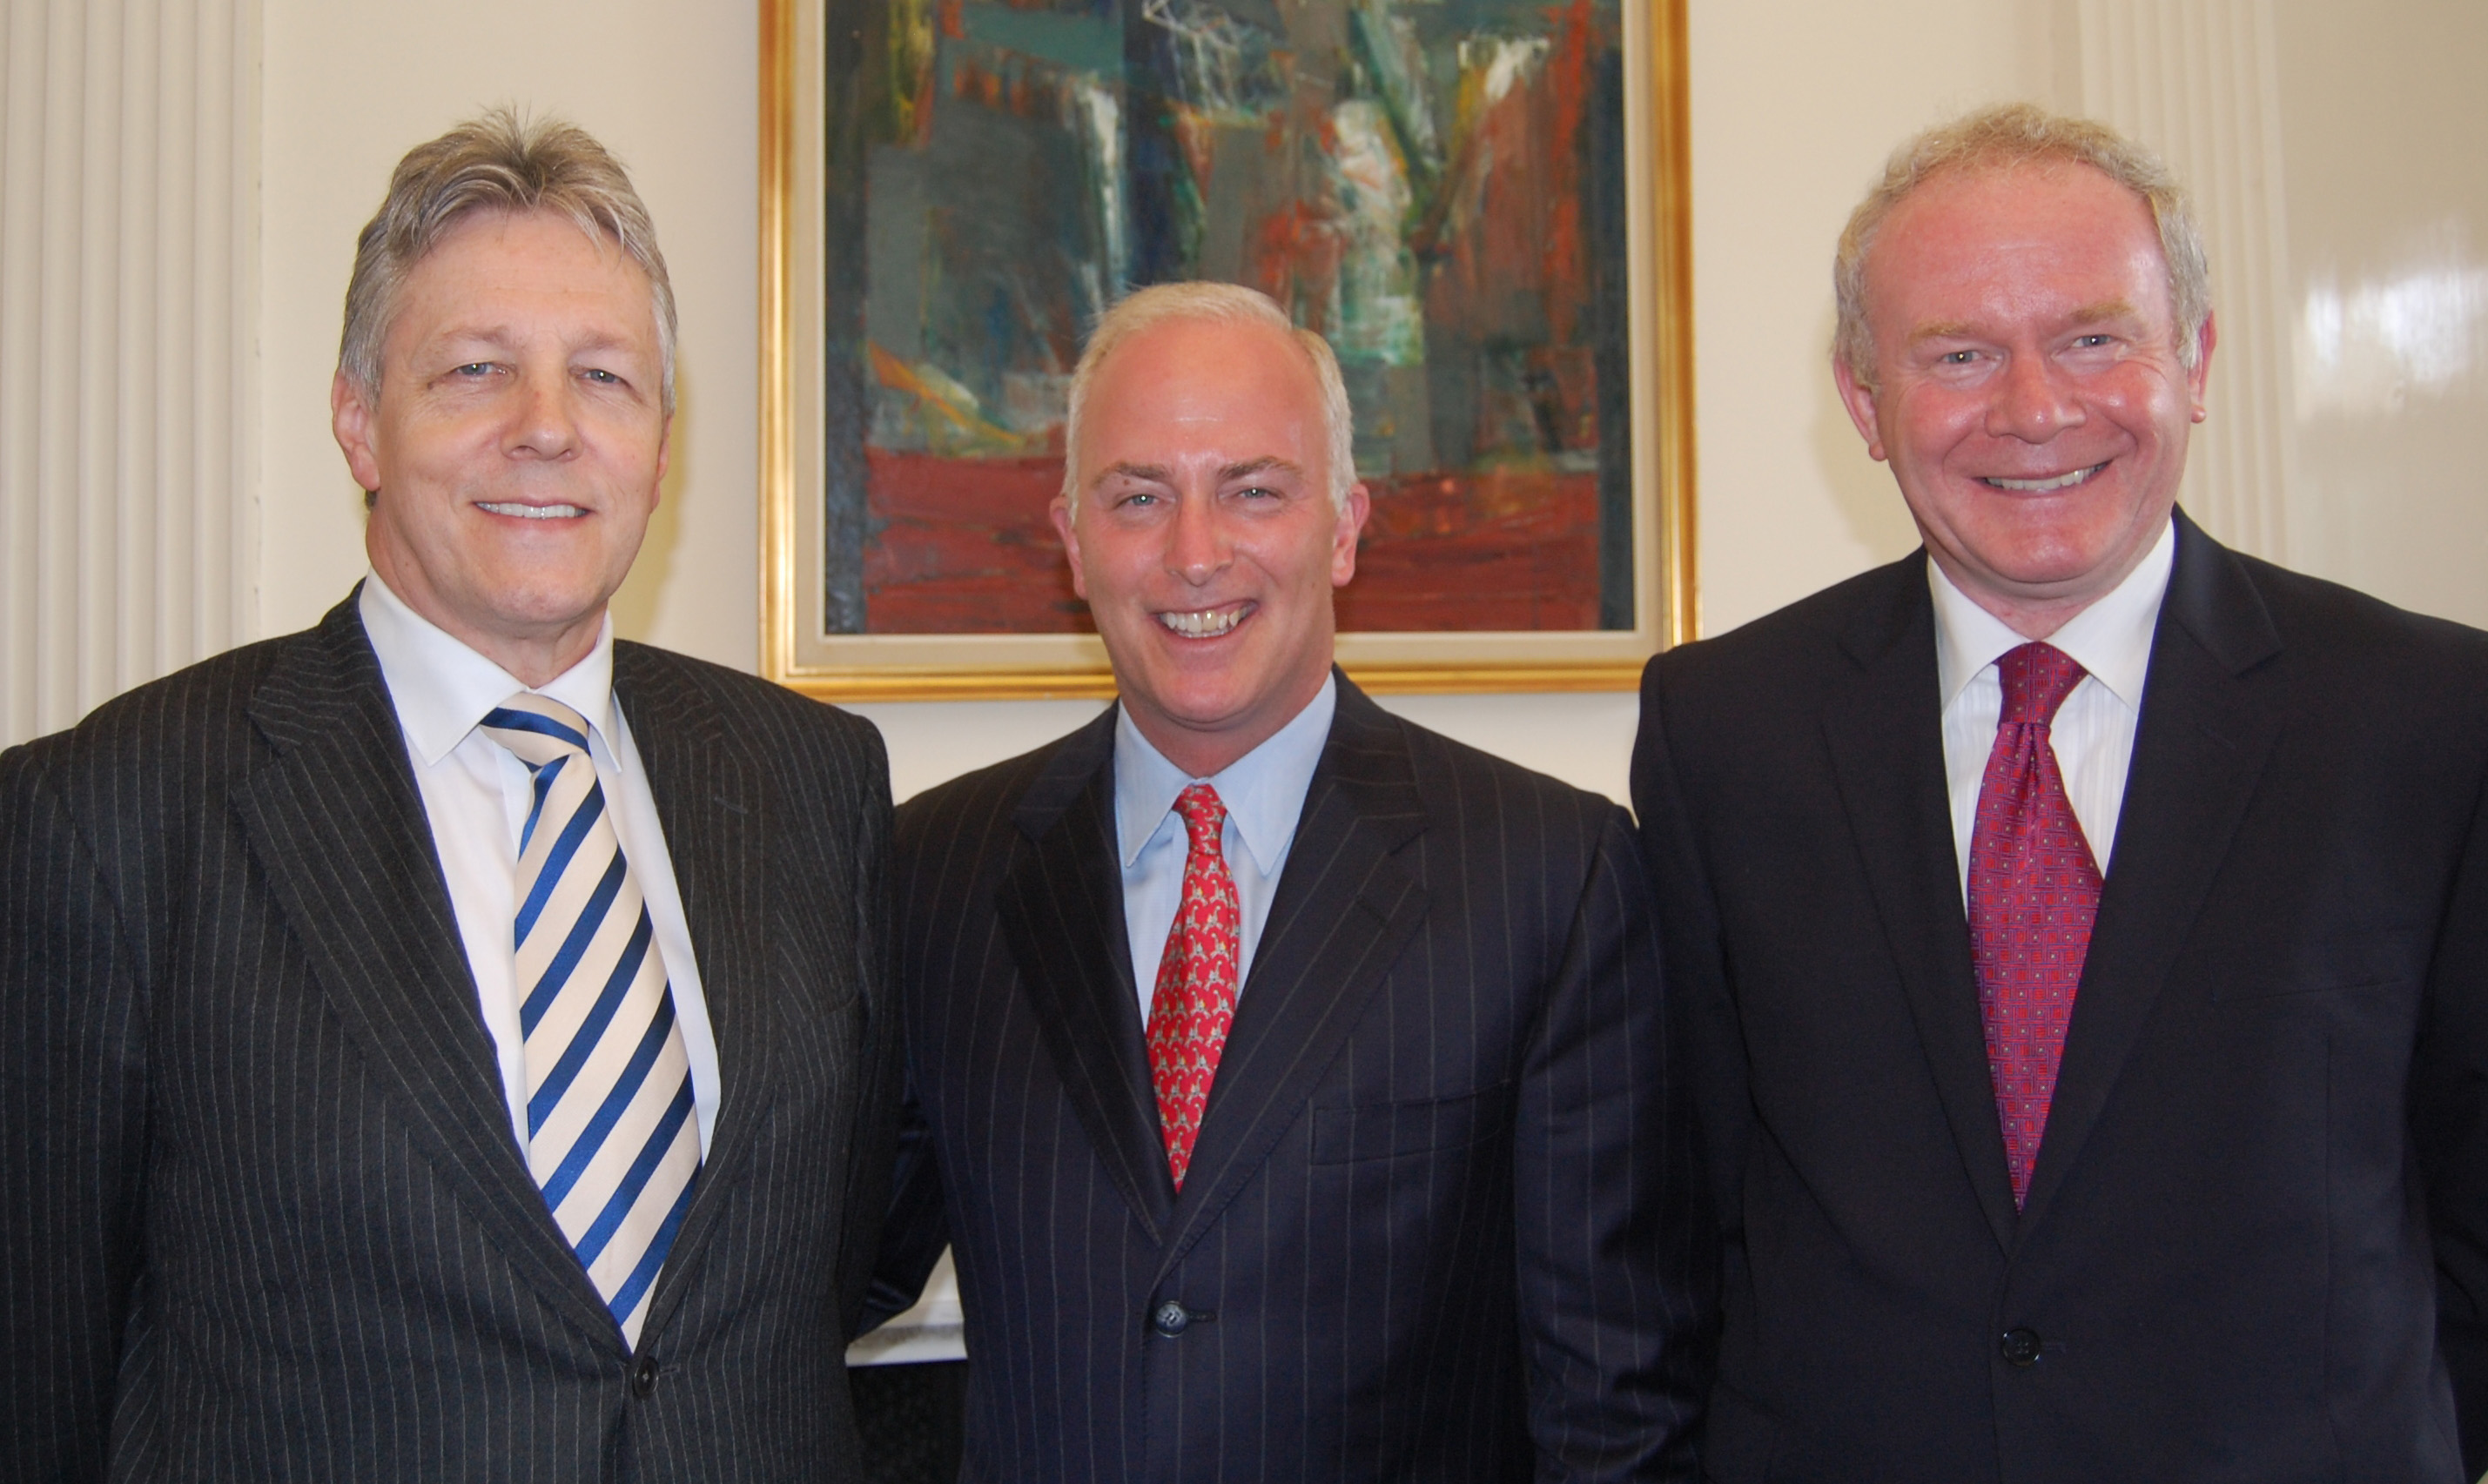 Bob McCann (center) With First Minister Robinson and Deputy Minister McGuinness at Stormont Castle in June 2009. 